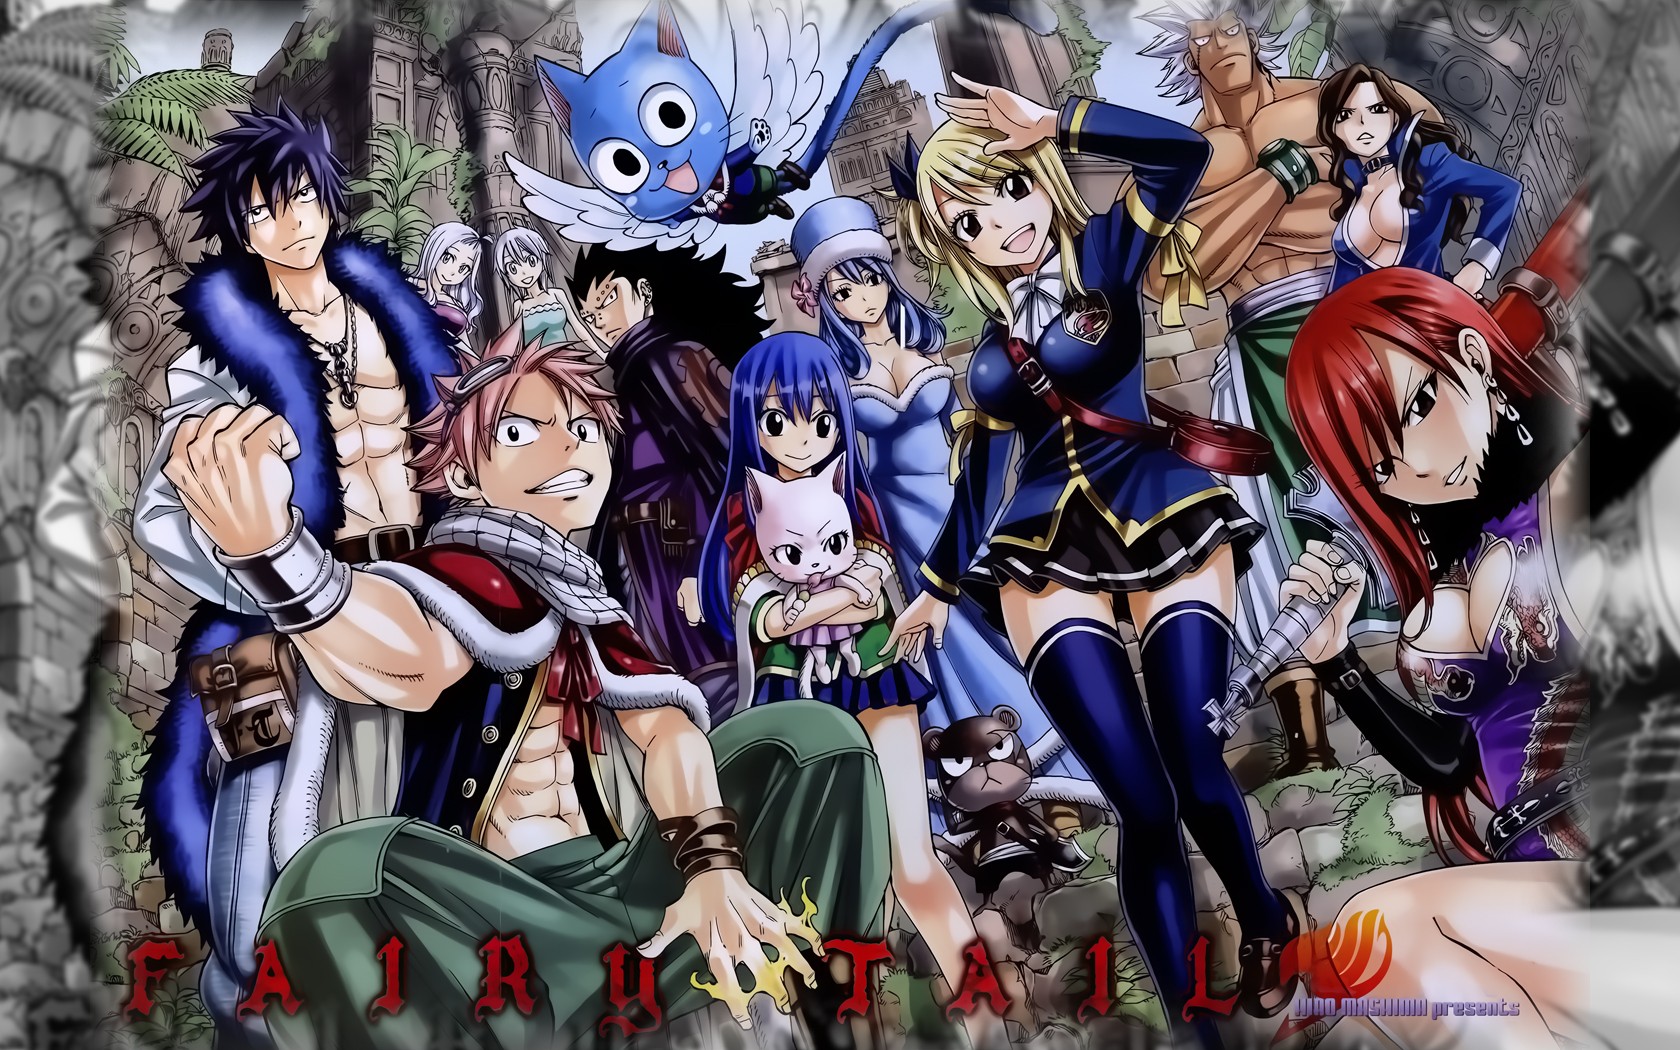 Who Is The Main Character Of Fairy Tail